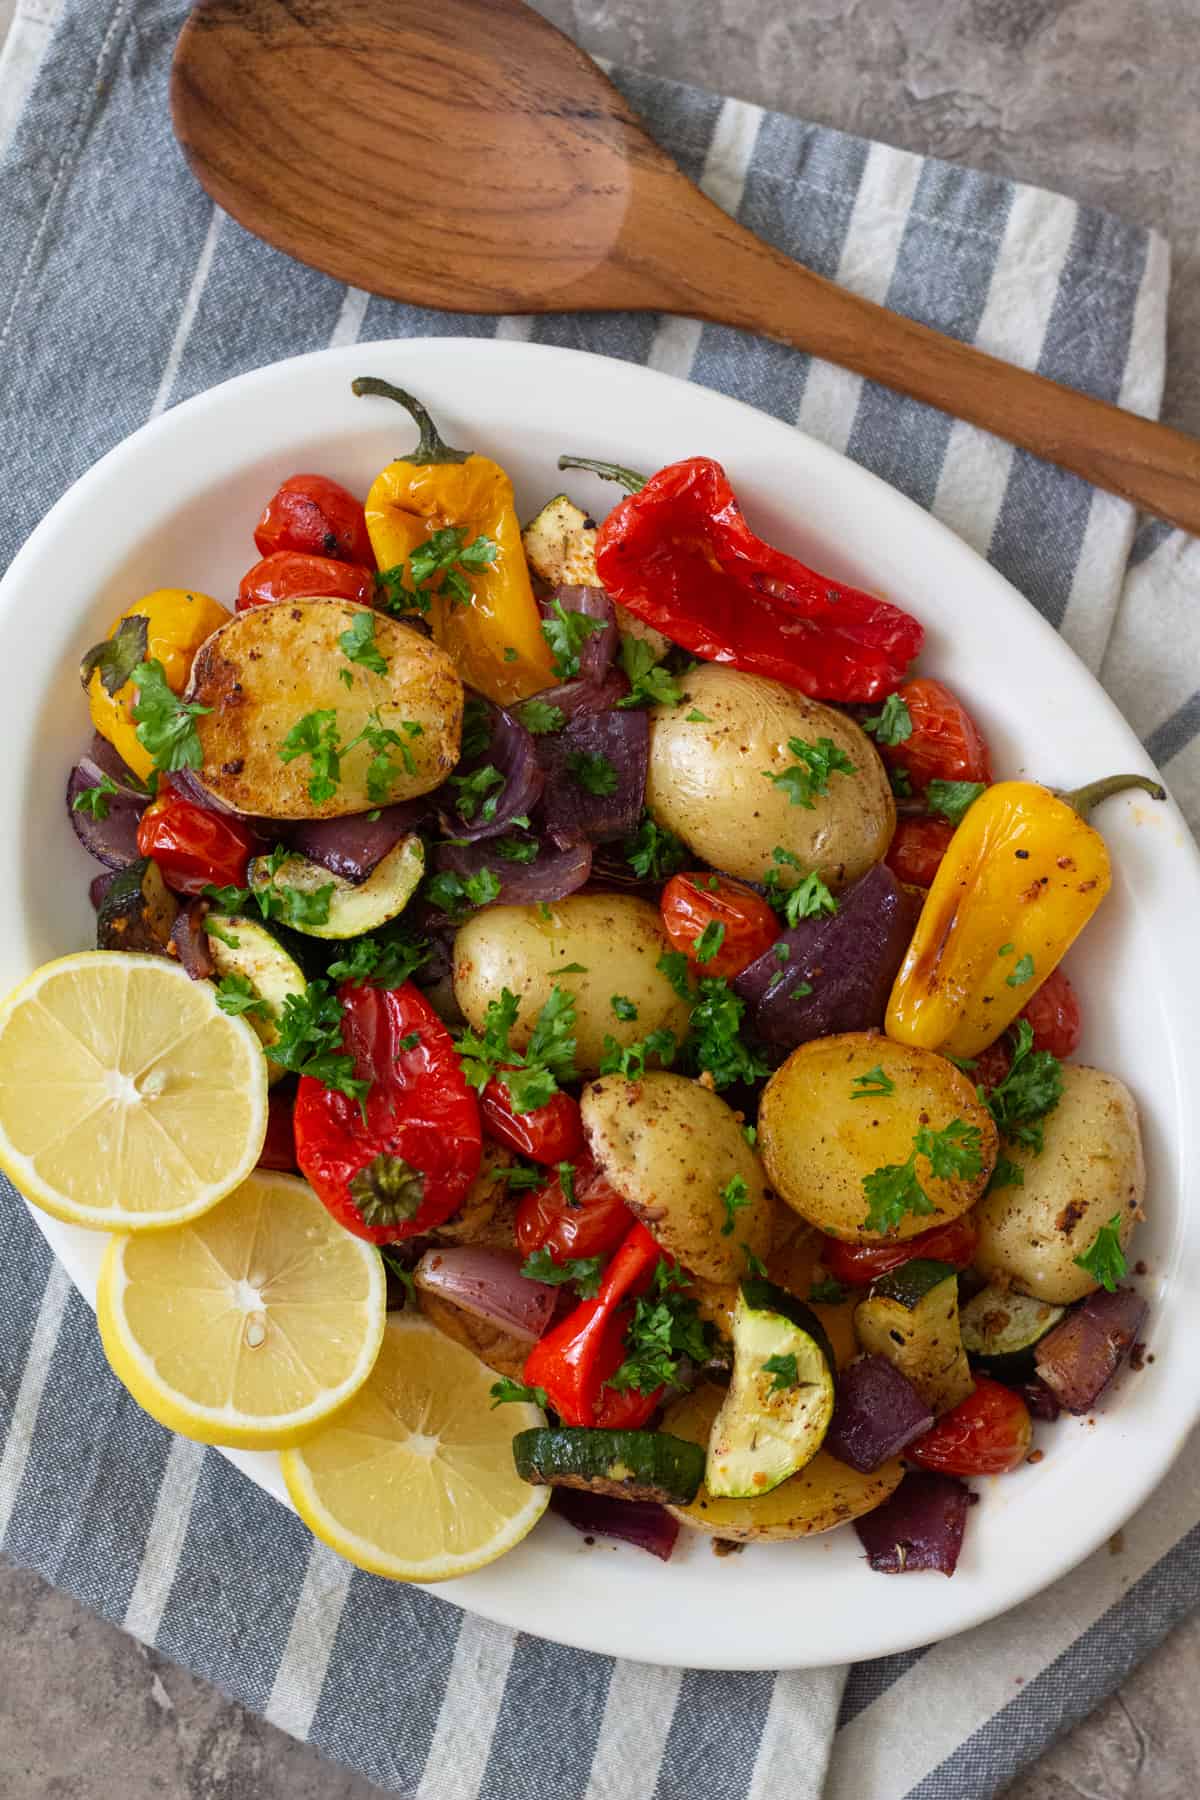 Mediterranean style oven roasted vegetables are so simple, yet hearty and delicious. They make for a wonderful side dish that's packed with flavor.
